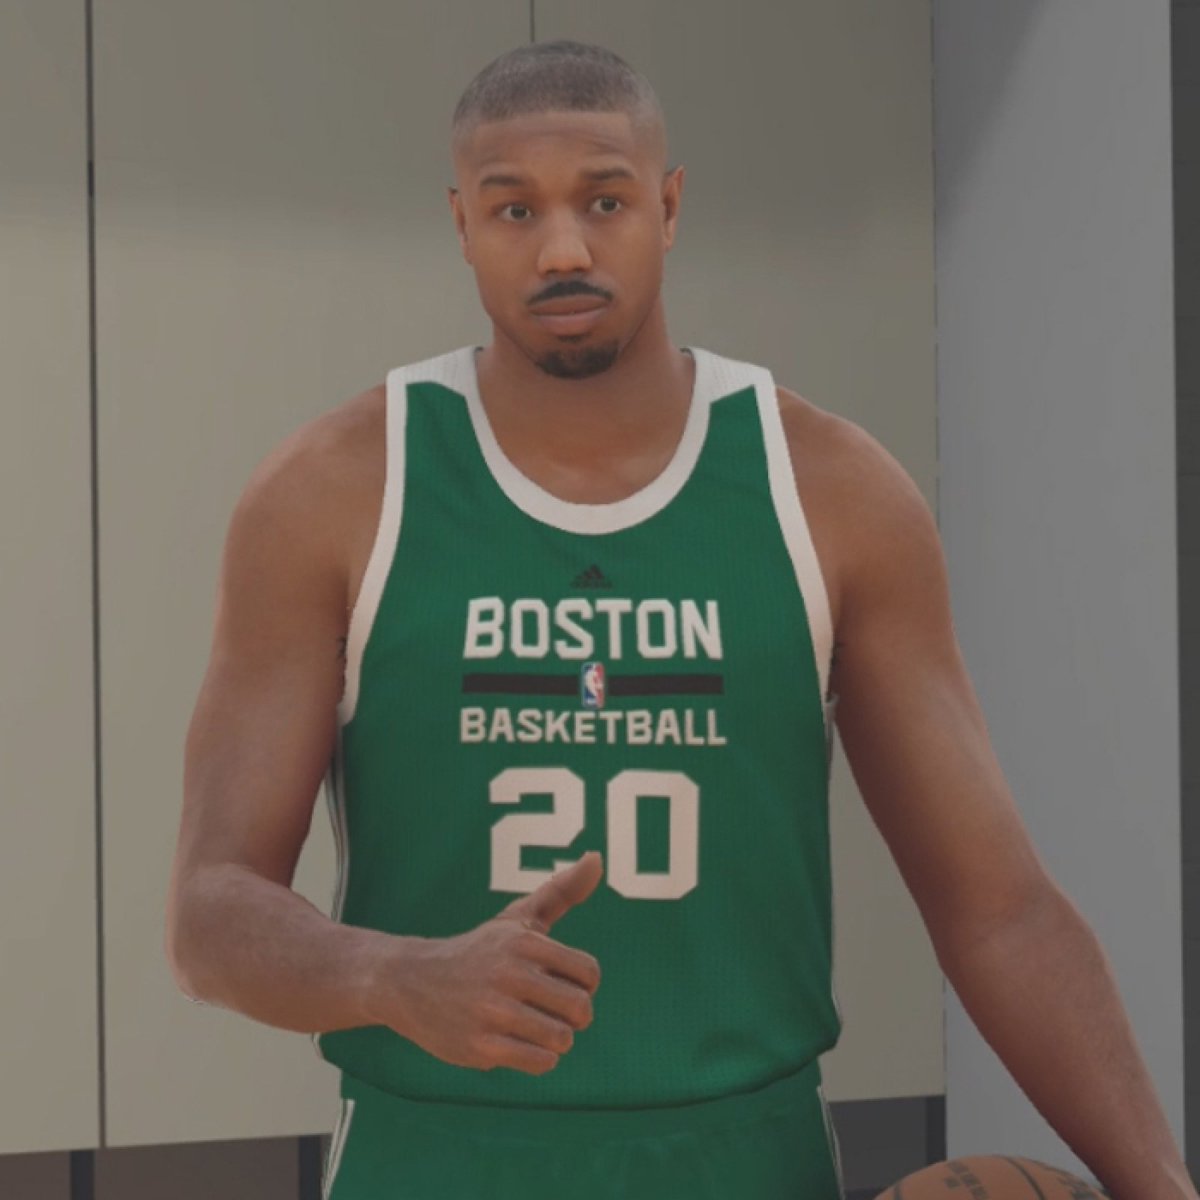 Name a fictional sports legend.

Justice Young
NBA 2K17